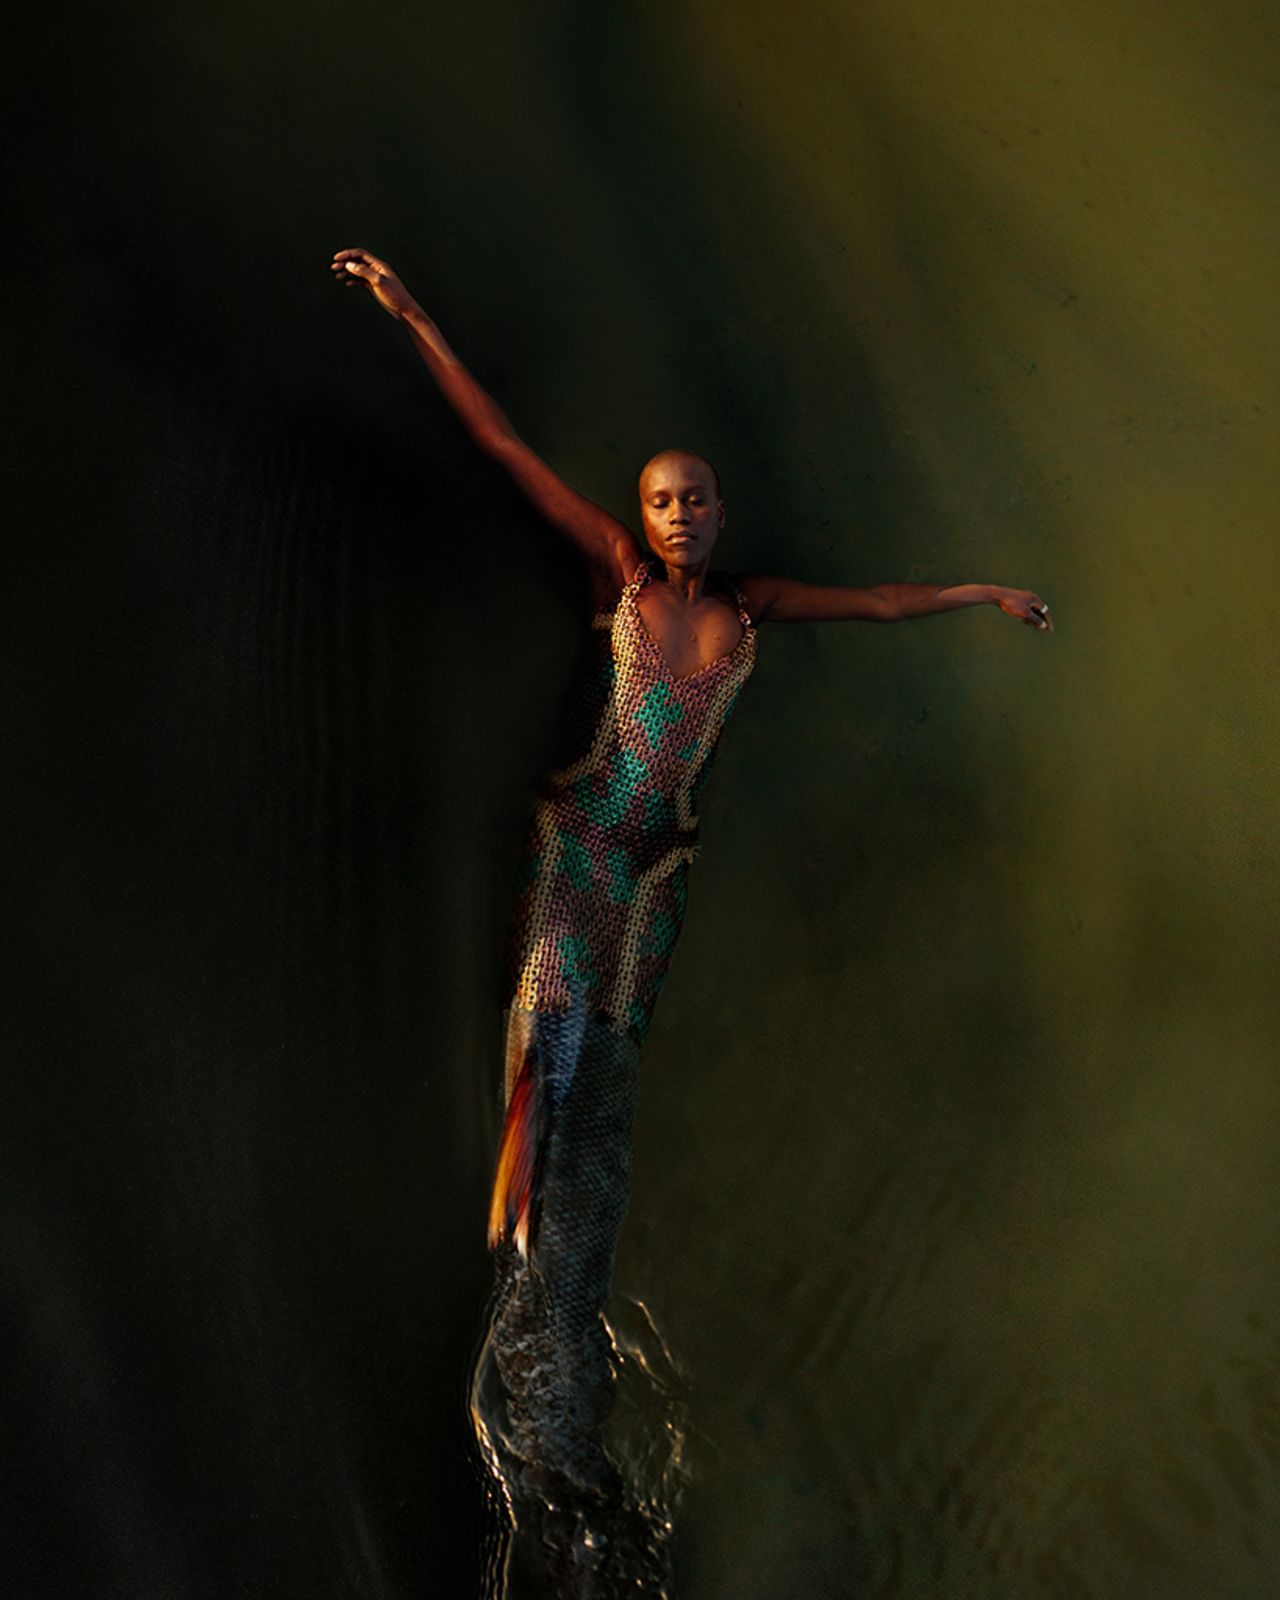 Ụzọchukwu uses his images to create space for Black and Brown people to see themselves in magic and myth. Pictured: "Buoyant", 2019.